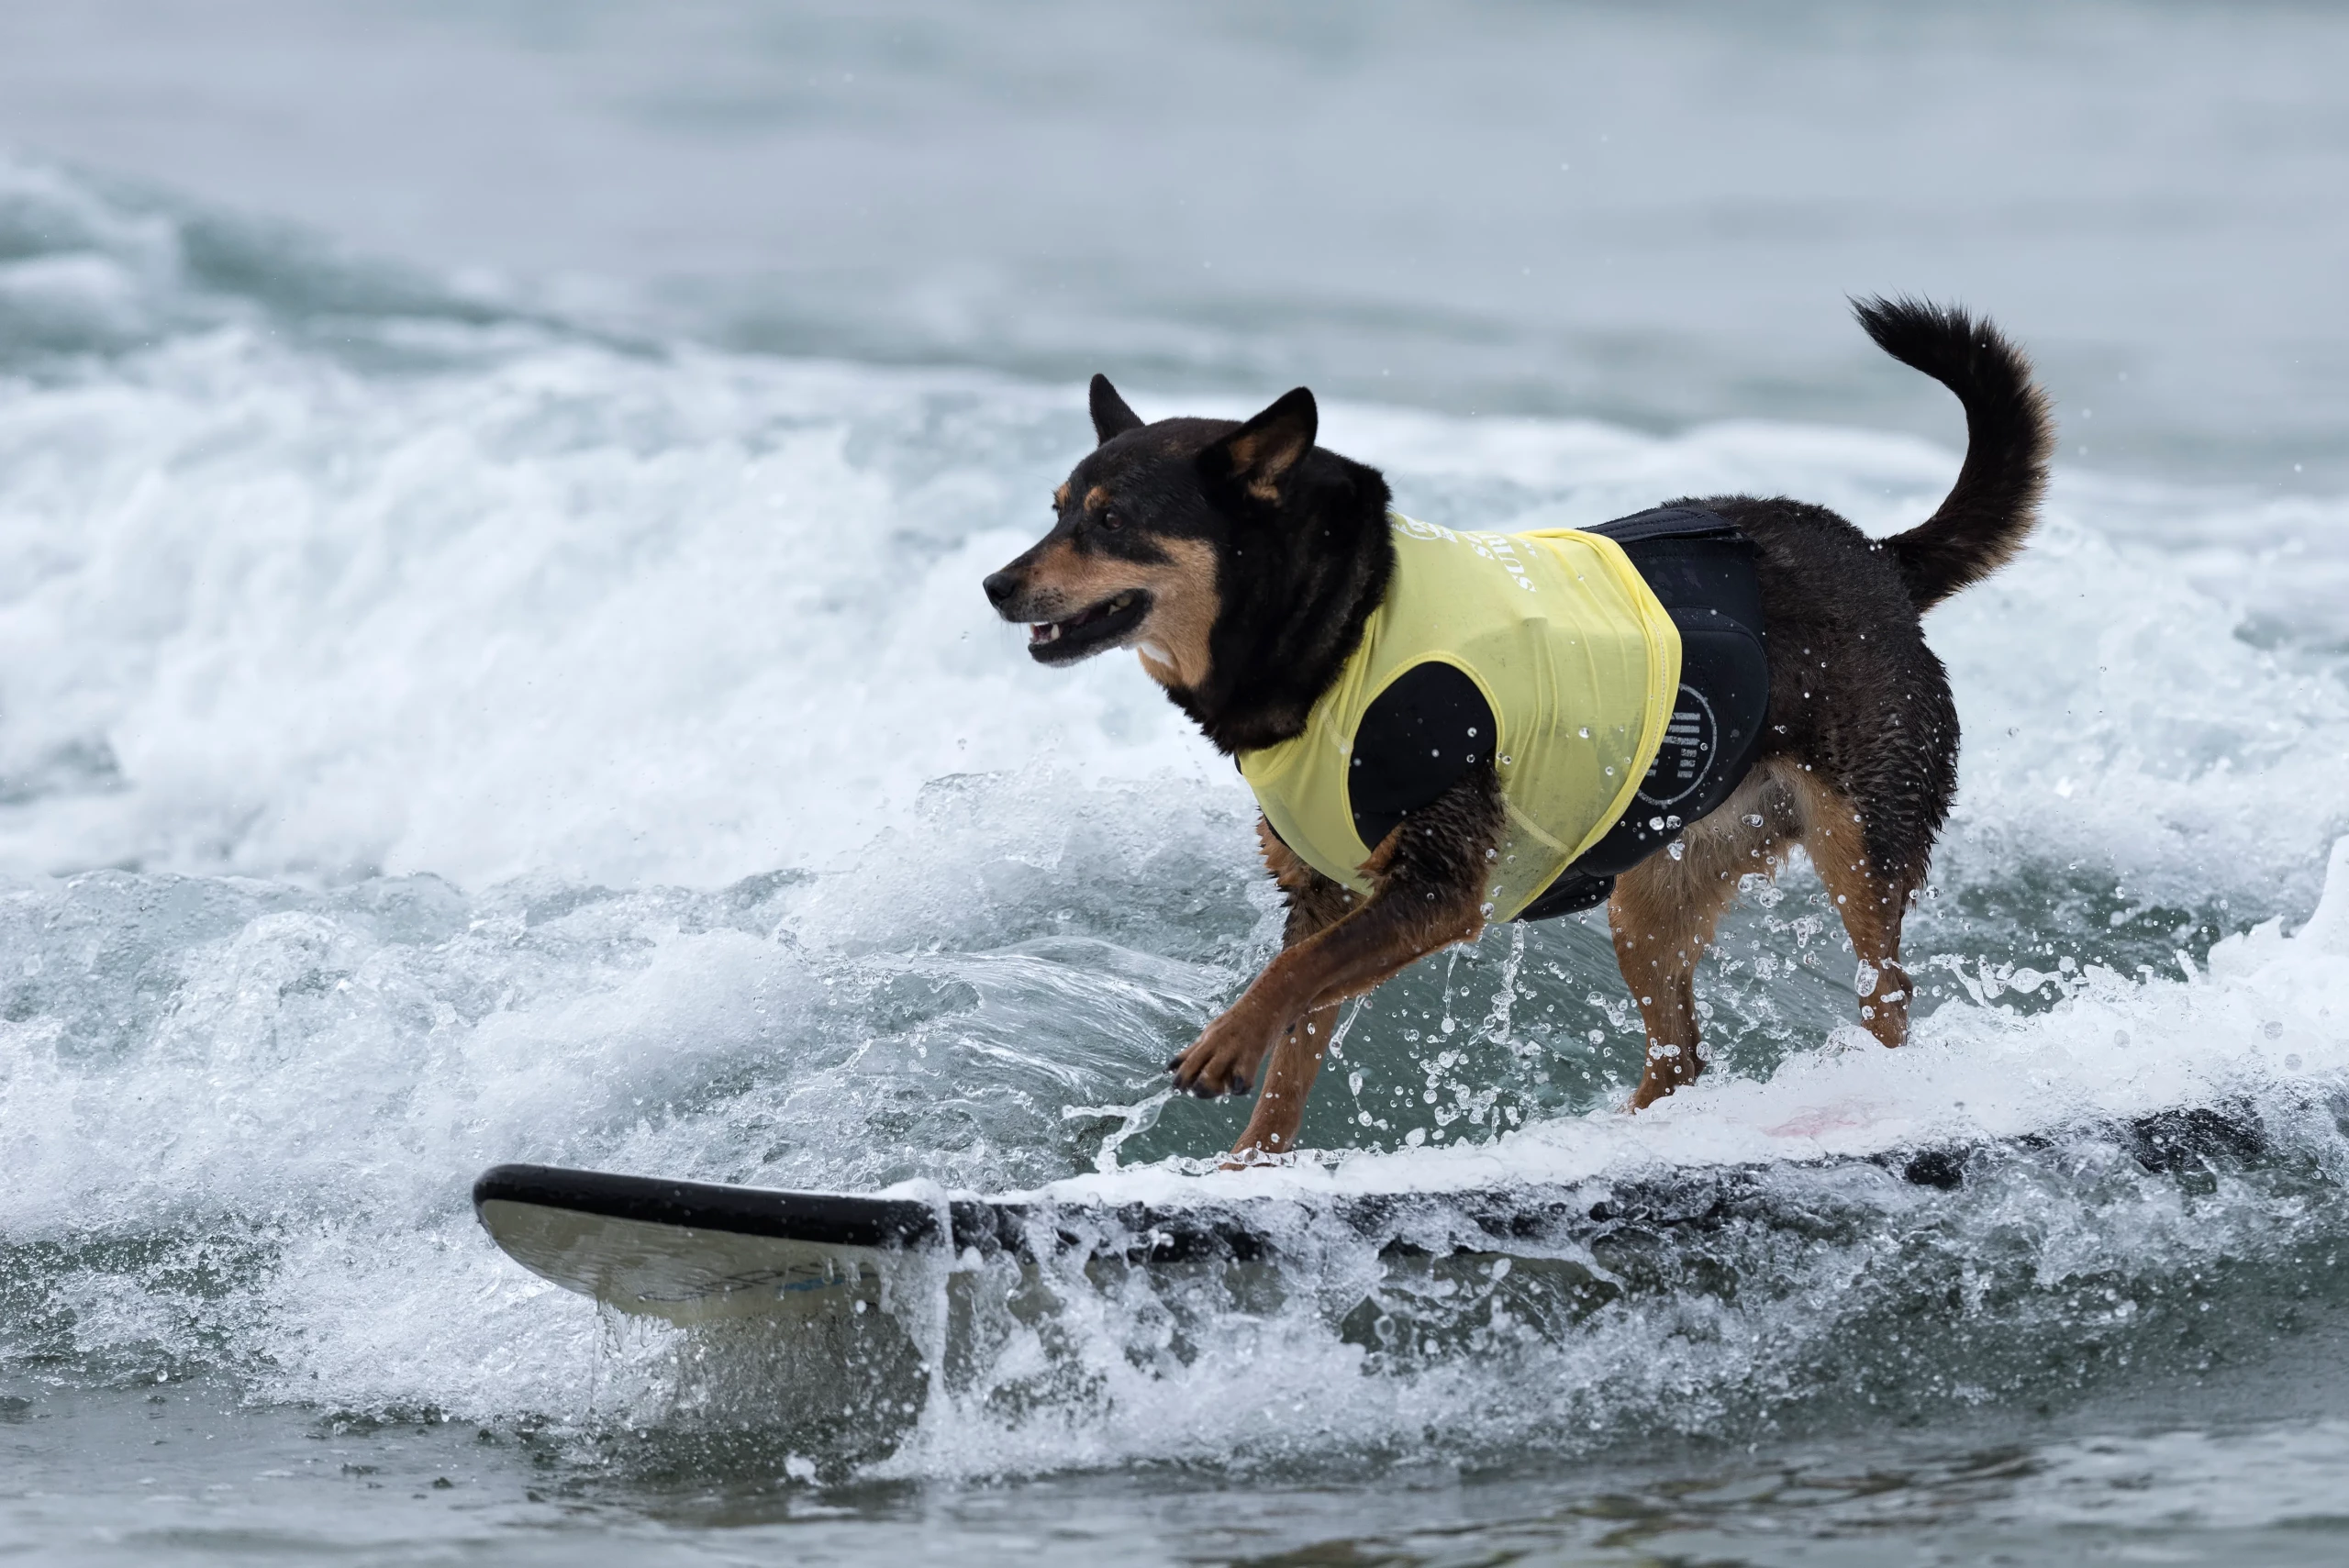 a dog surfing on a wave